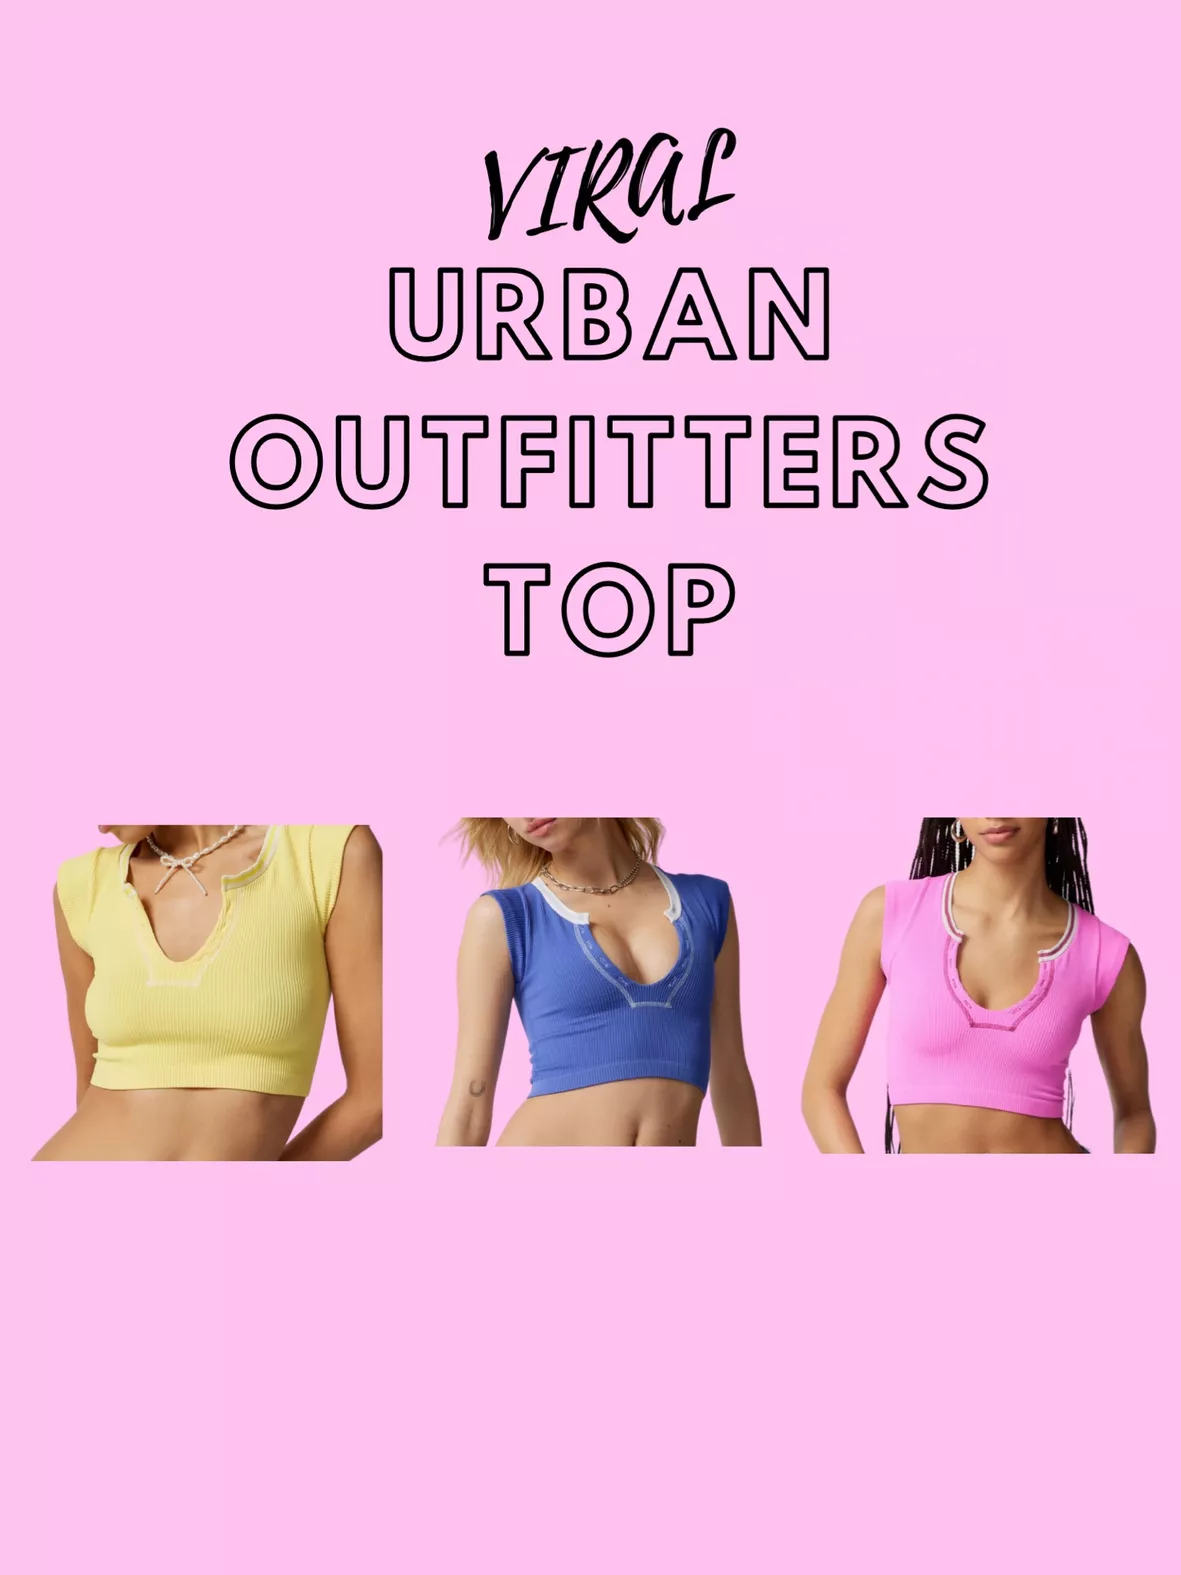 NEW Urban Outfitters Out From Under Go For Gold Seamless Top in Teal XS/